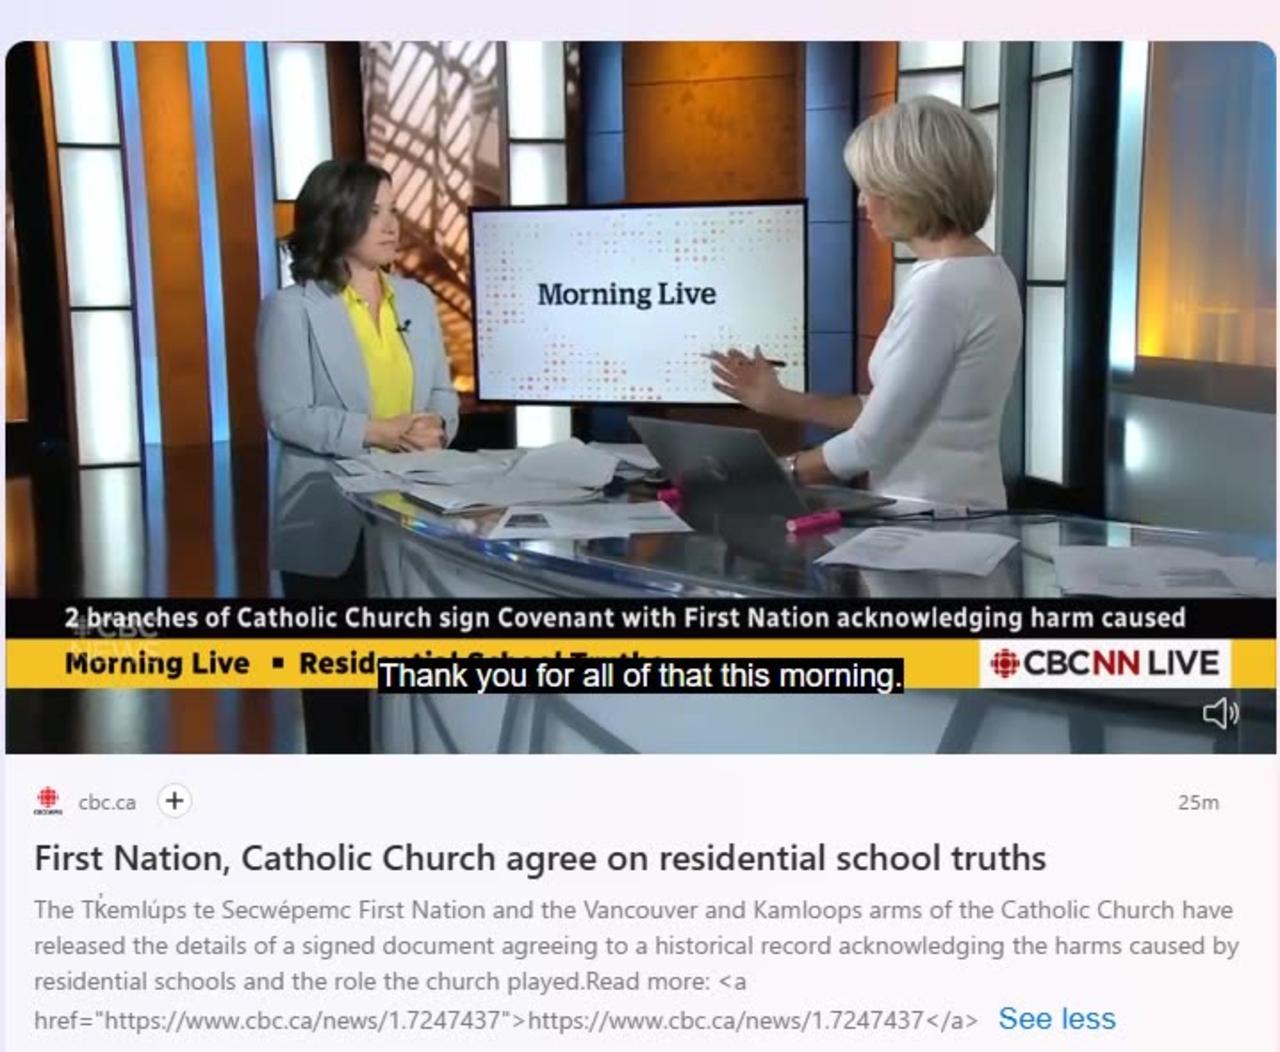 First Nation, Catholic Church agree on residential school truths